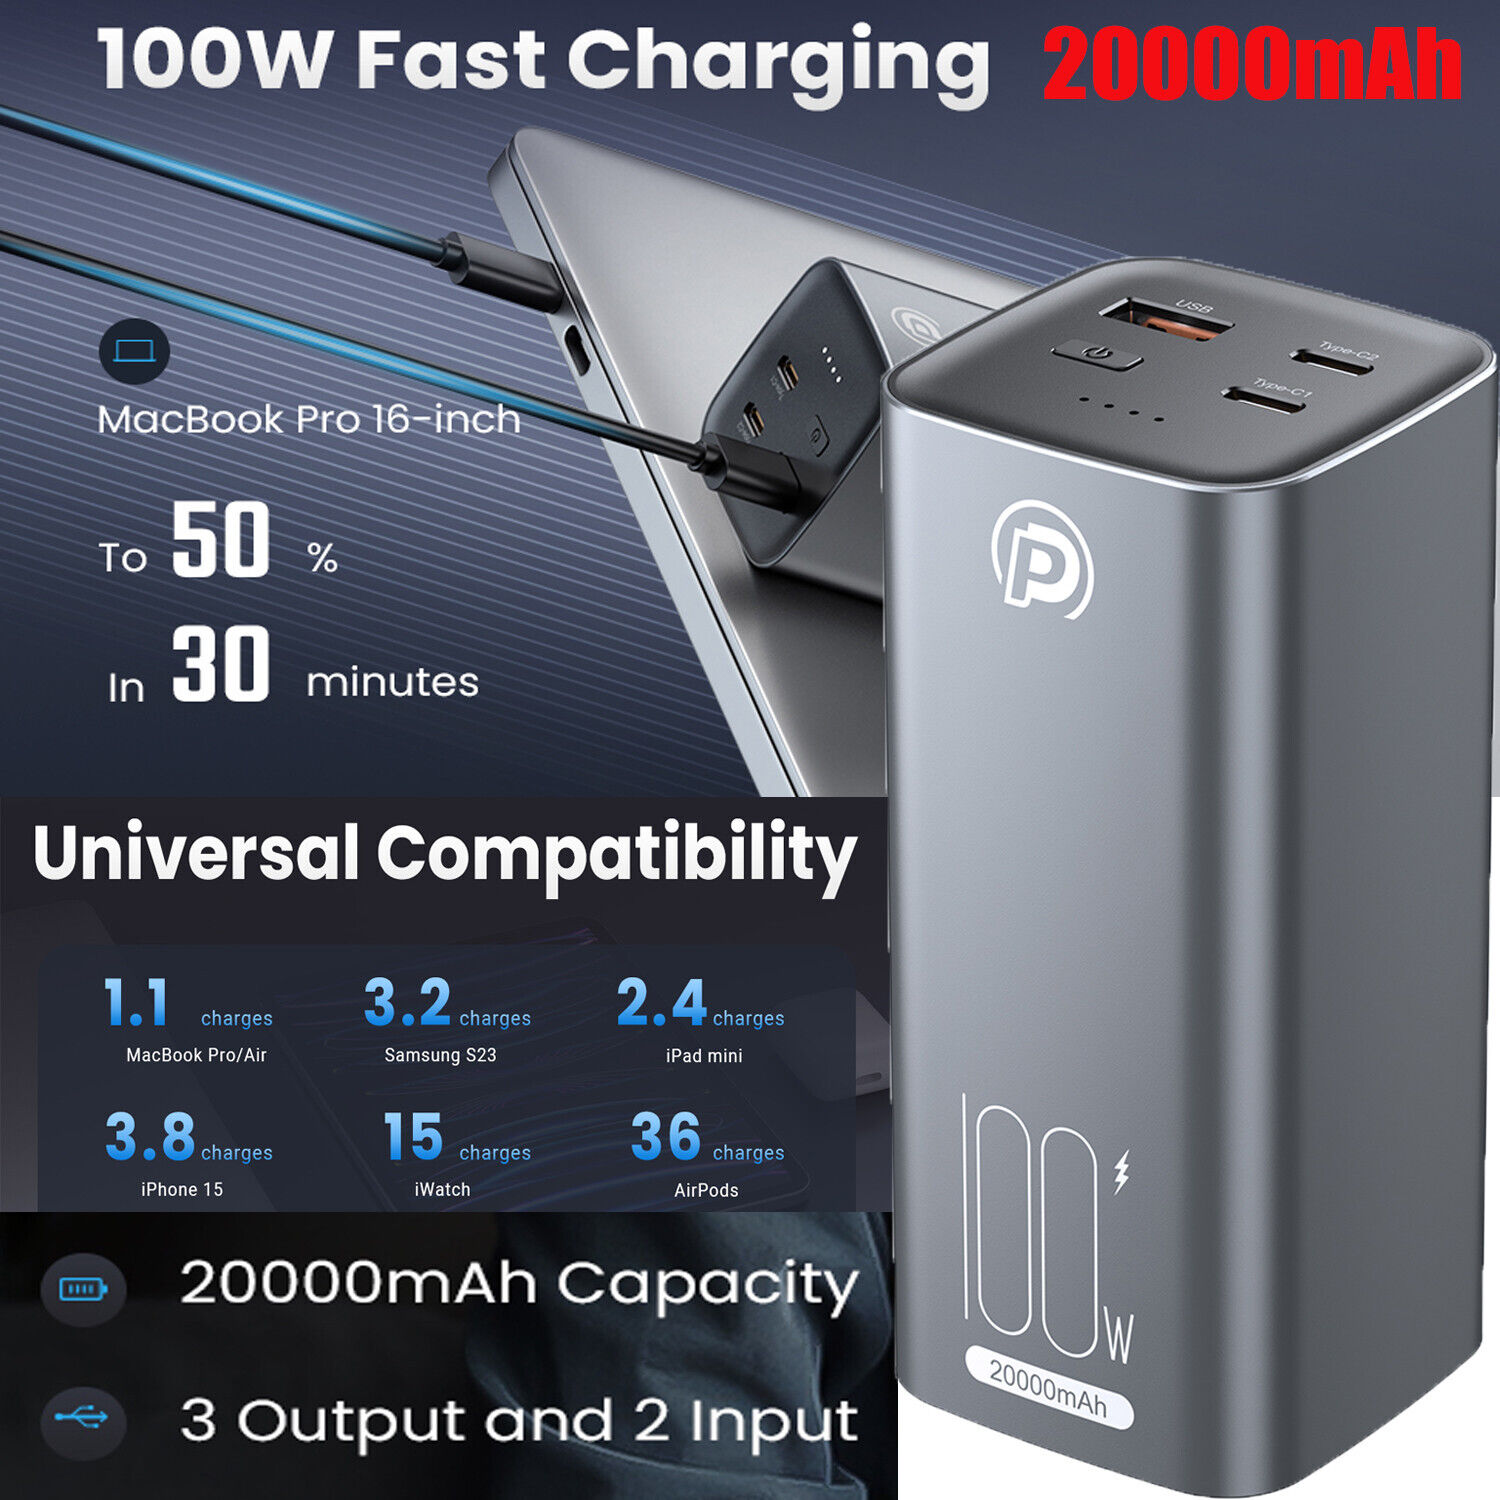 20000mAh Portable Charger 100W Laptop Power Bank PD3.0 Fast Charging Battery NEW